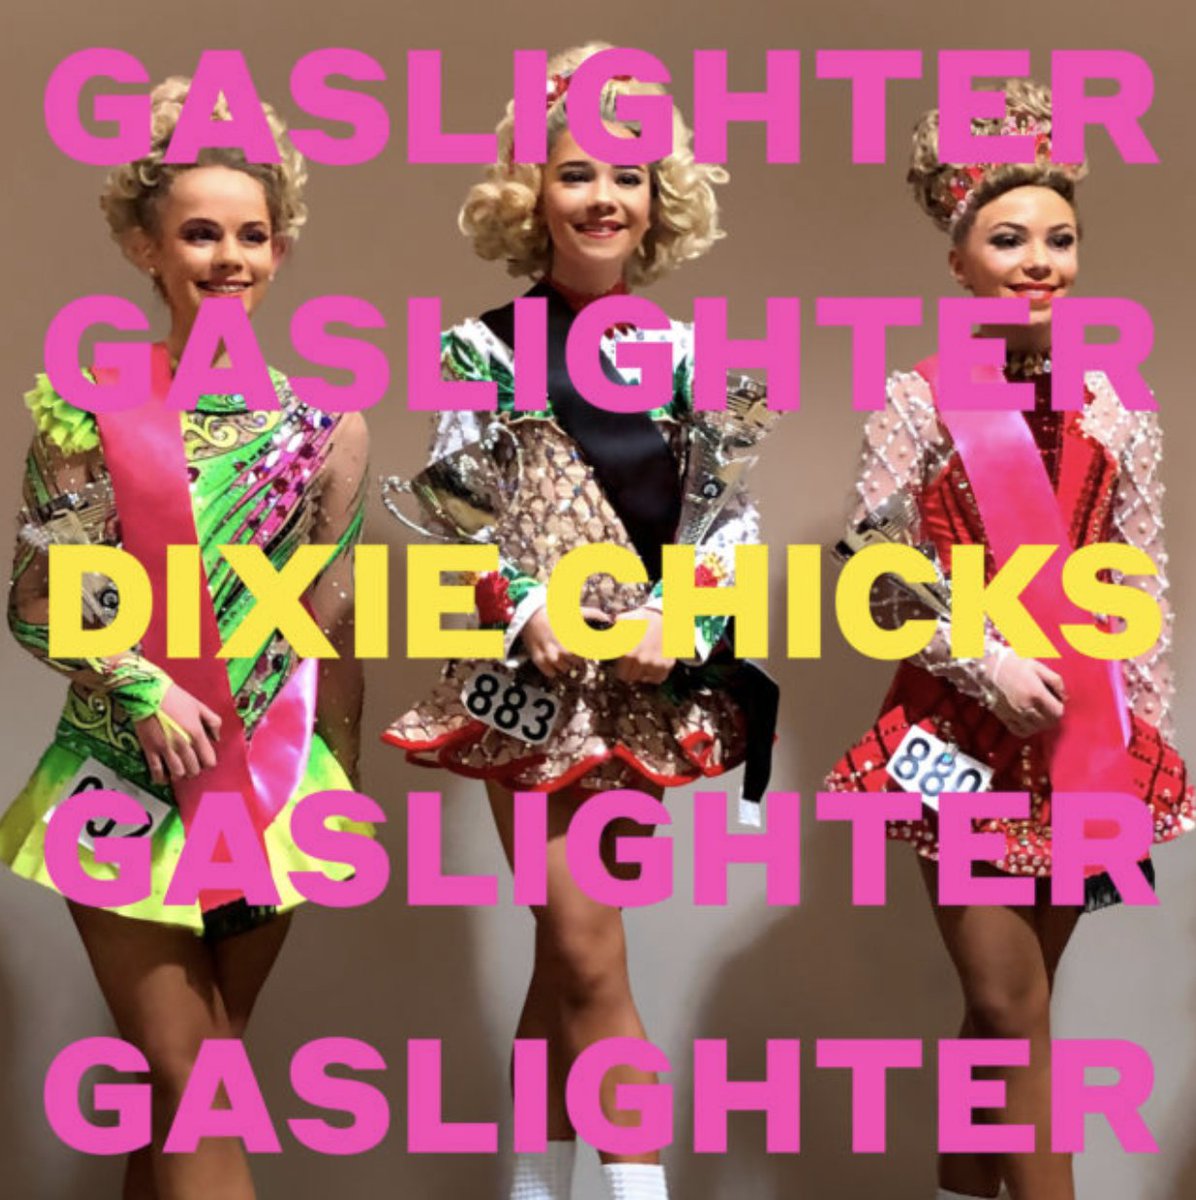 You can always count on the @dixiechicks to speak their truth from the forthright 'Not Ready To Make Nice' to the just-dropped #Gaslighter. Learn more about the @dixiechicks impact here!
 @SOFfilm @CNNOriginals @StevieVanZandt #CNNSoundtracks 

bit.ly/2TEdJ1q